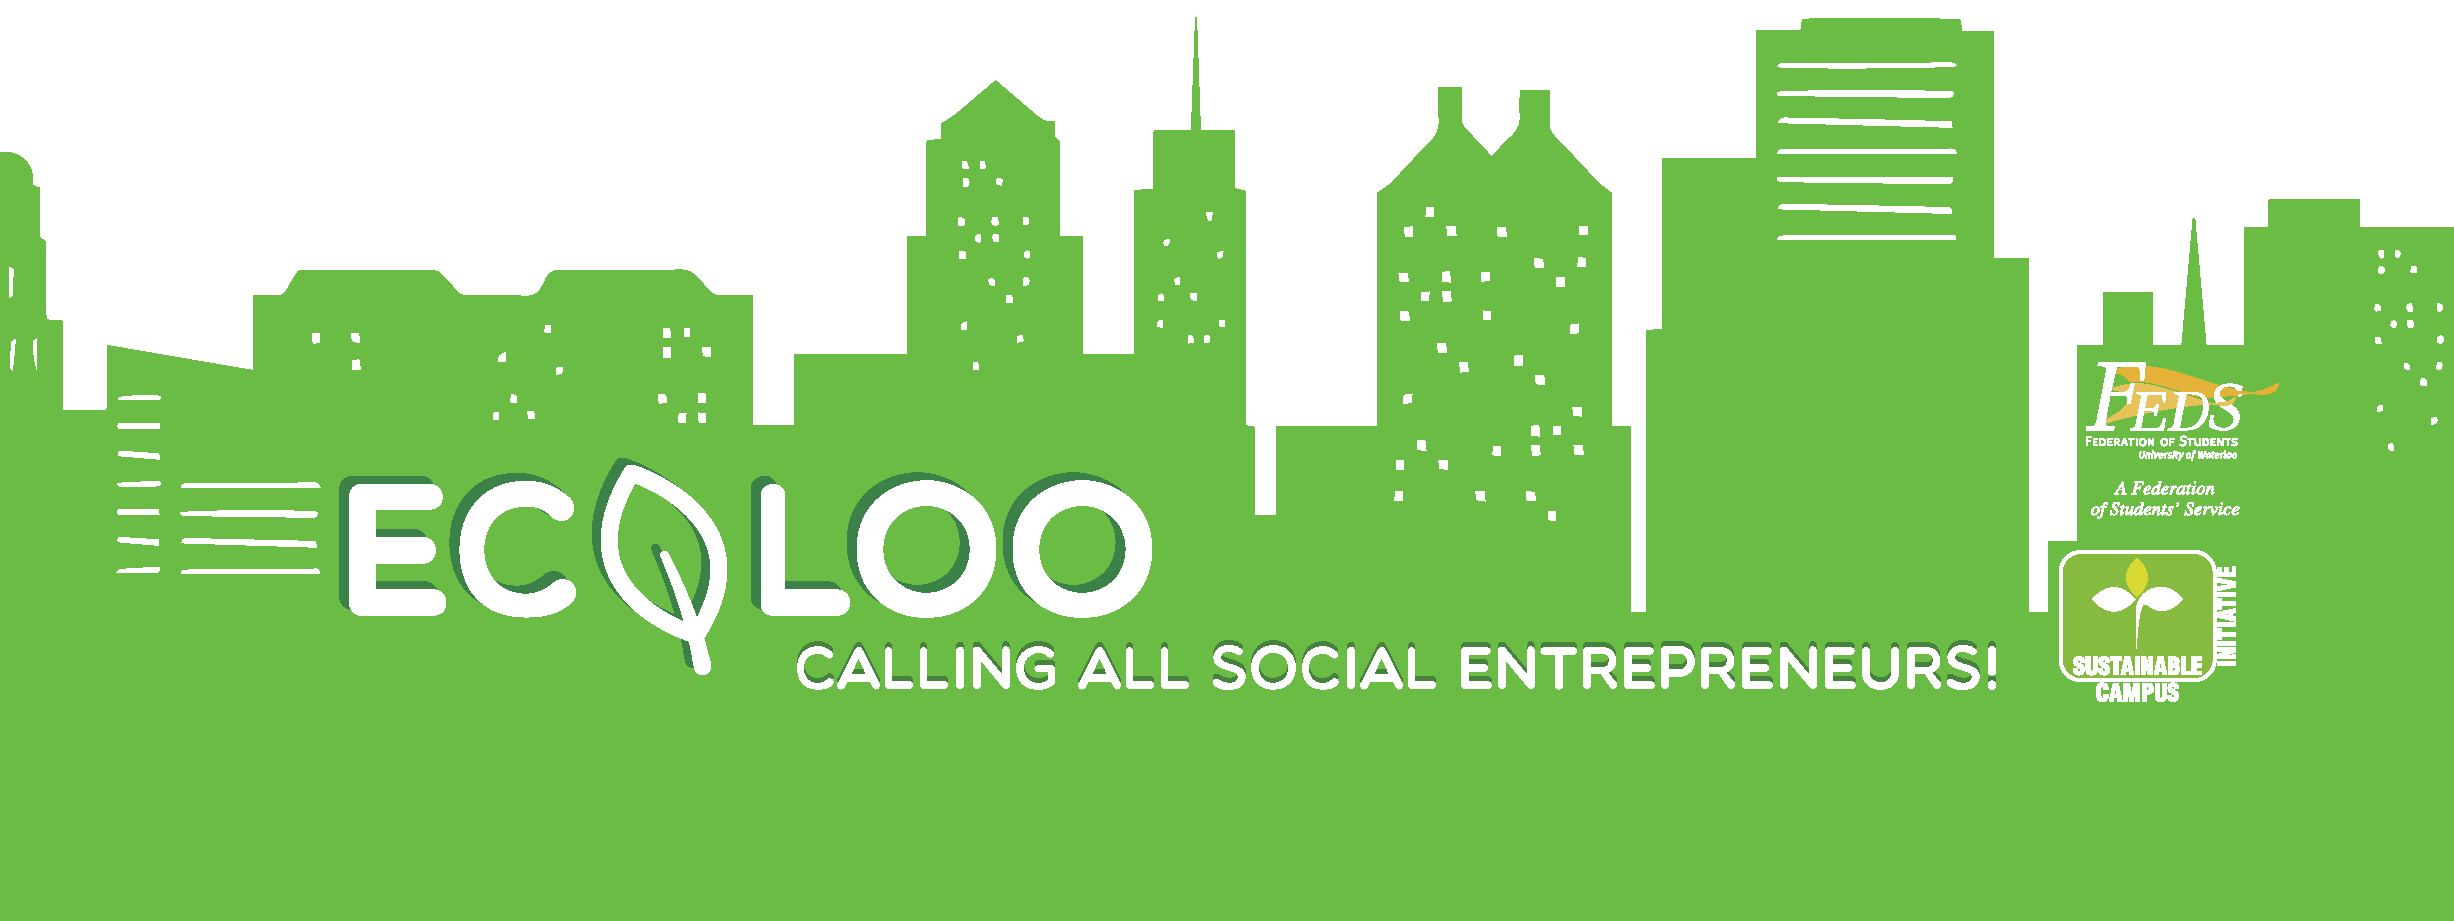 ECOLOO pitch contest banner.